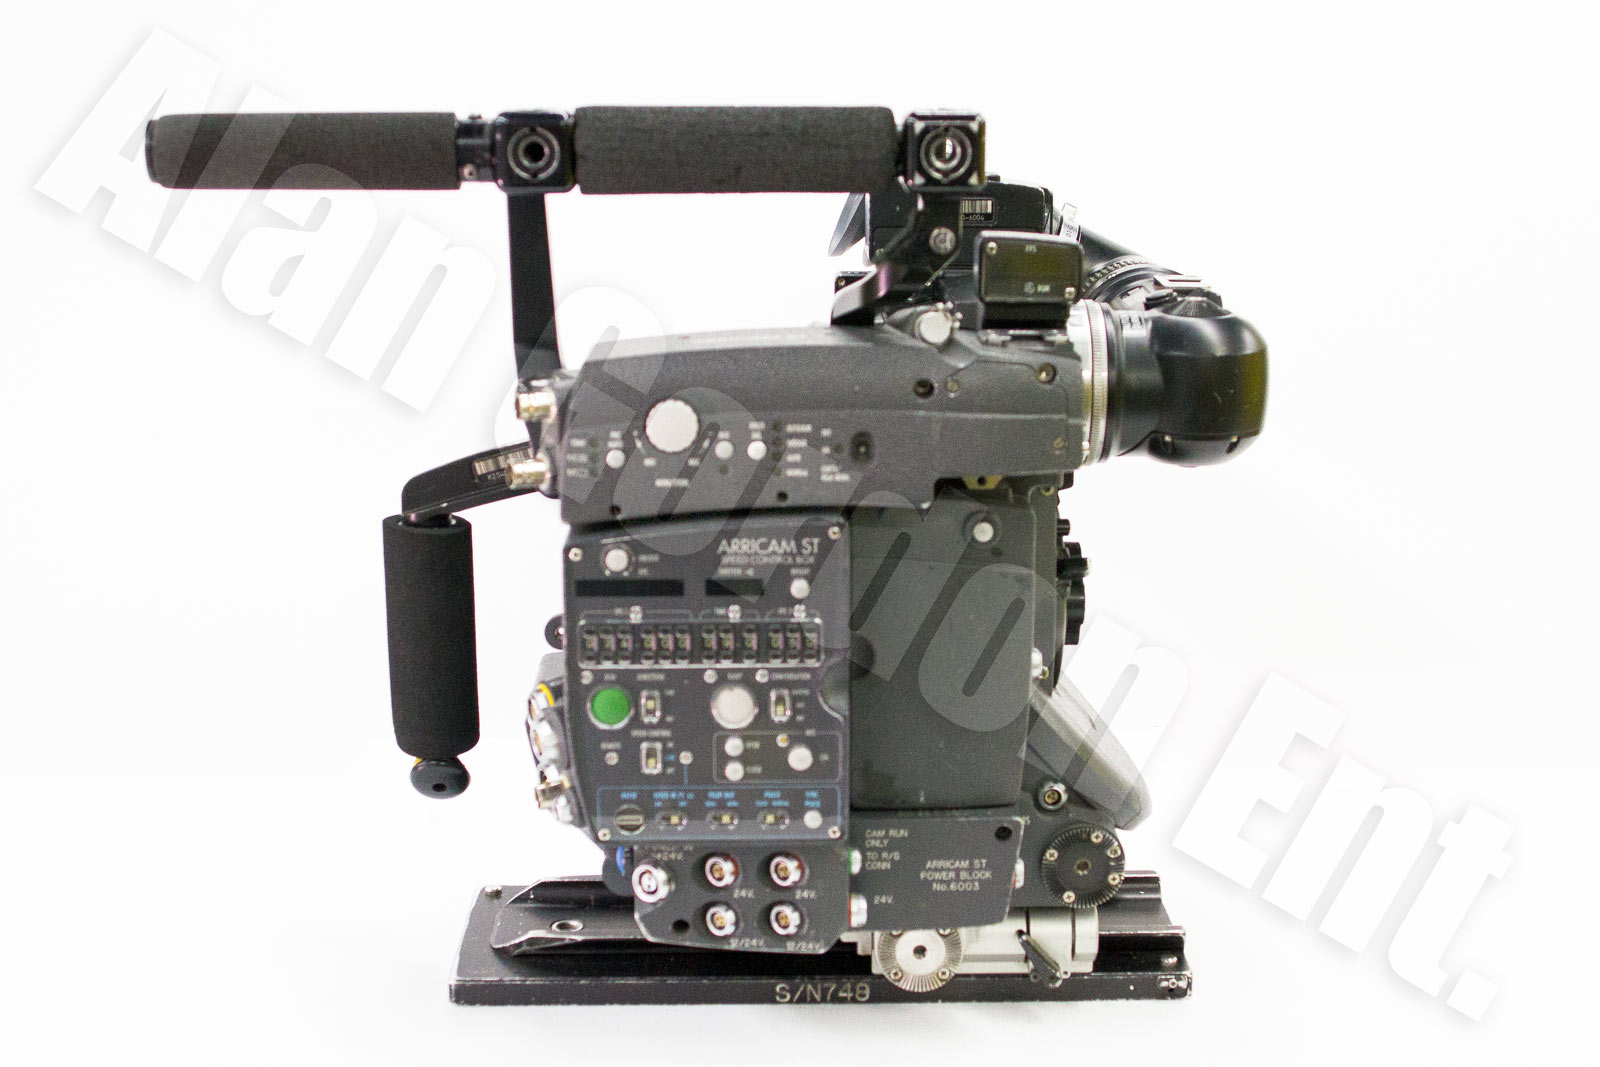 Arricam ST 4-Perf Camera Package for Sale - Smart Side View